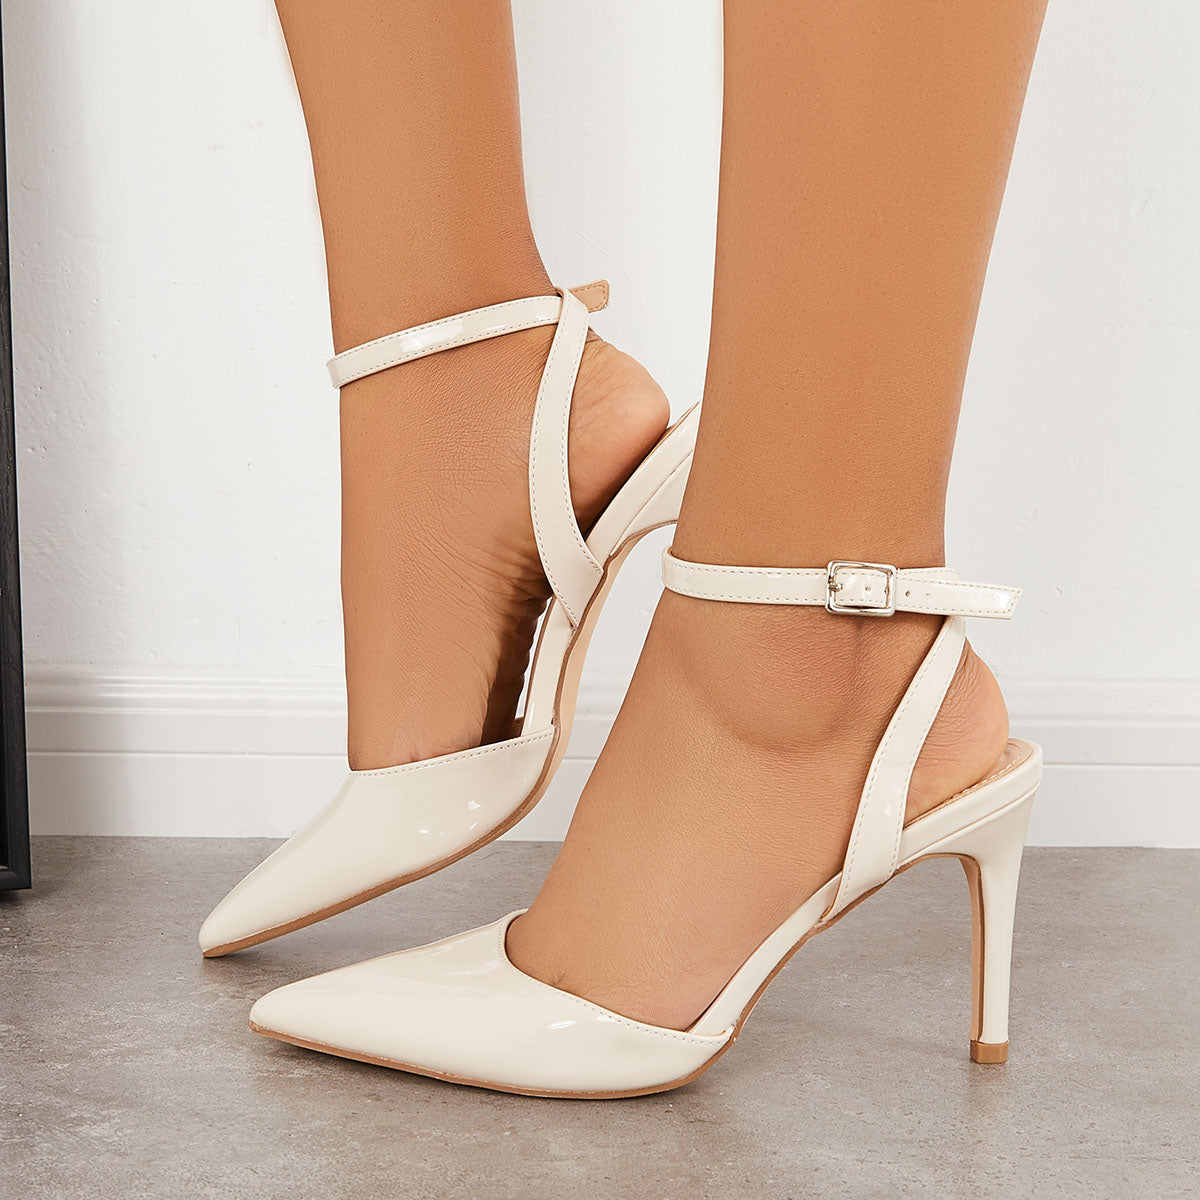 Pointy Toe Slingback Pumps Stiletto Heel Ankle Strap Sandals